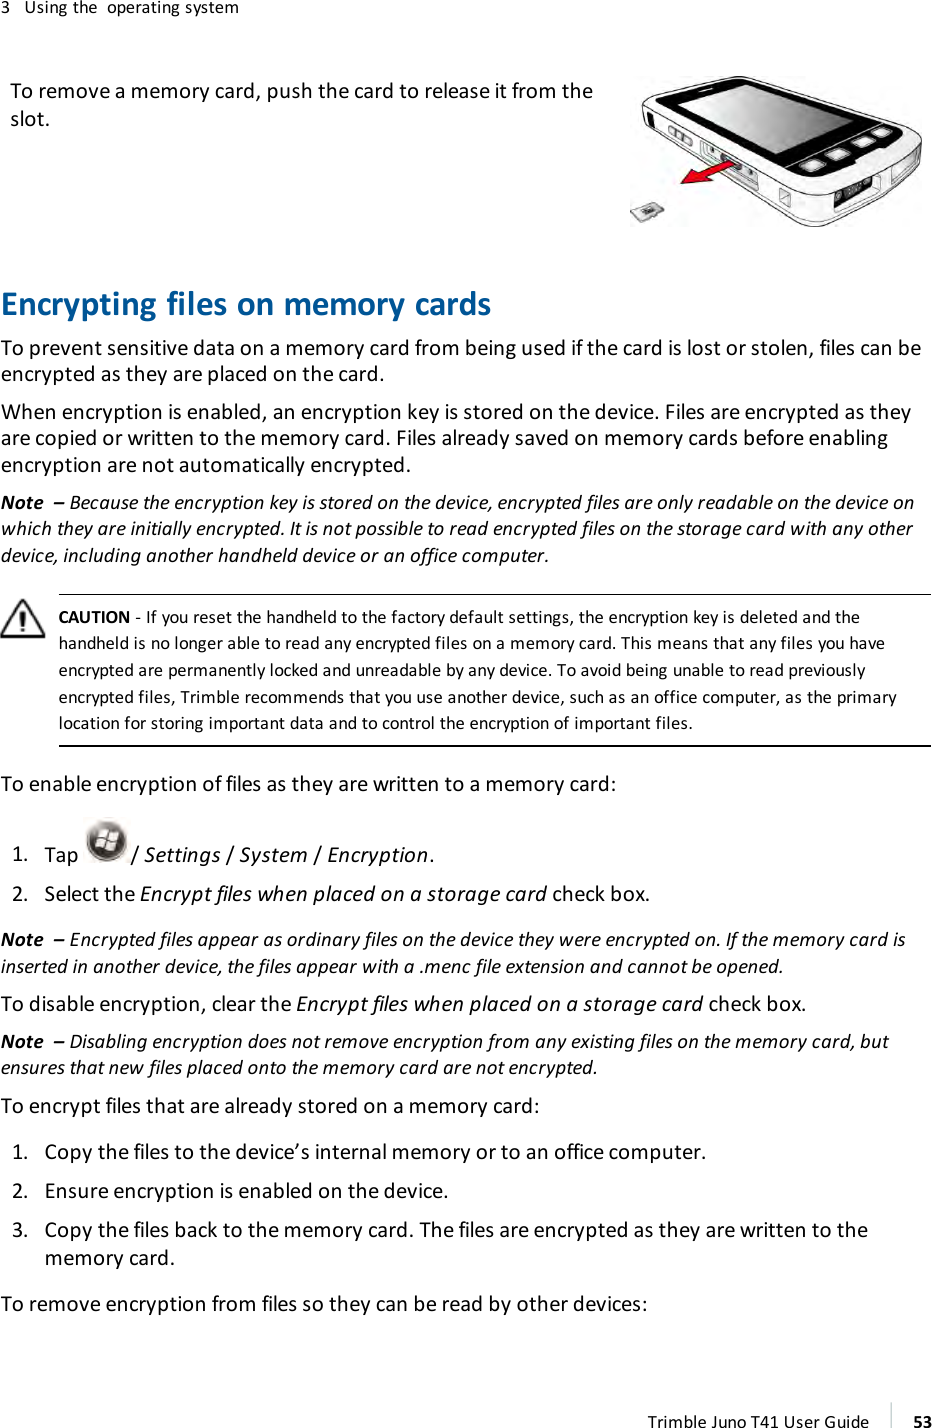 3 Using the operating systemTo remove a memory card, push the card to release it from theslot.Encrypting files on memory cardsTo prevent sensitive data on a memory card from being used if the card is lost or stolen, files can beencrypted as they are placed on the card.When encryption is enabled, an encryption key is stored on the device. Files are encrypted as theyare copied or written to the memory card. Files already saved on memory cards before enablingencryption are not automatically encrypted.Note – Because the encryption key is stored on the device, encrypted files are only readable on the device onwhich they are initially encrypted. It is not possible to read encrypted files on the storage card with any otherdevice, including another handheld device or an office computer.CAUTION - If you reset the handheld to the factory default settings, the encryption key is deleted and thehandheld is no longer able to read any encrypted files on a memory card. This means that any files you haveencrypted are permanently locked and unreadable by any device. To avoid being unable to read previouslyencrypted files, Trimble recommends that you use another device, such as an office computer, as the primarylocation for storing important data and to control the encryption of important files.To enable encryption of files as they are written to a memory card:1. Tap /Settings/ System/Encryption.2. Select the Encrypt files when placed on a storage card check box.Note – Encrypted files appear as ordinary files on the device they were encrypted on. If the memory card isinserted in another device, the files appear with a .menc file extension and cannot be opened.To disable encryption, clear the Encrypt files when placed on a storage card check box.Note – Disabling encryption does not remove encryption from any existing files on the memory card, butensures that new files placed onto the memory card are not encrypted.To encrypt files that are already stored on a memory card:1. Copy the files to the device’s internal memory or to an office computer.2. Ensure encryption is enabled on the device.3. Copy the files back to the memory card. The files are encrypted as they are written to thememory card.To remove encryption from files so they can be read by other devices:Trimble Juno T41 User Guide 53